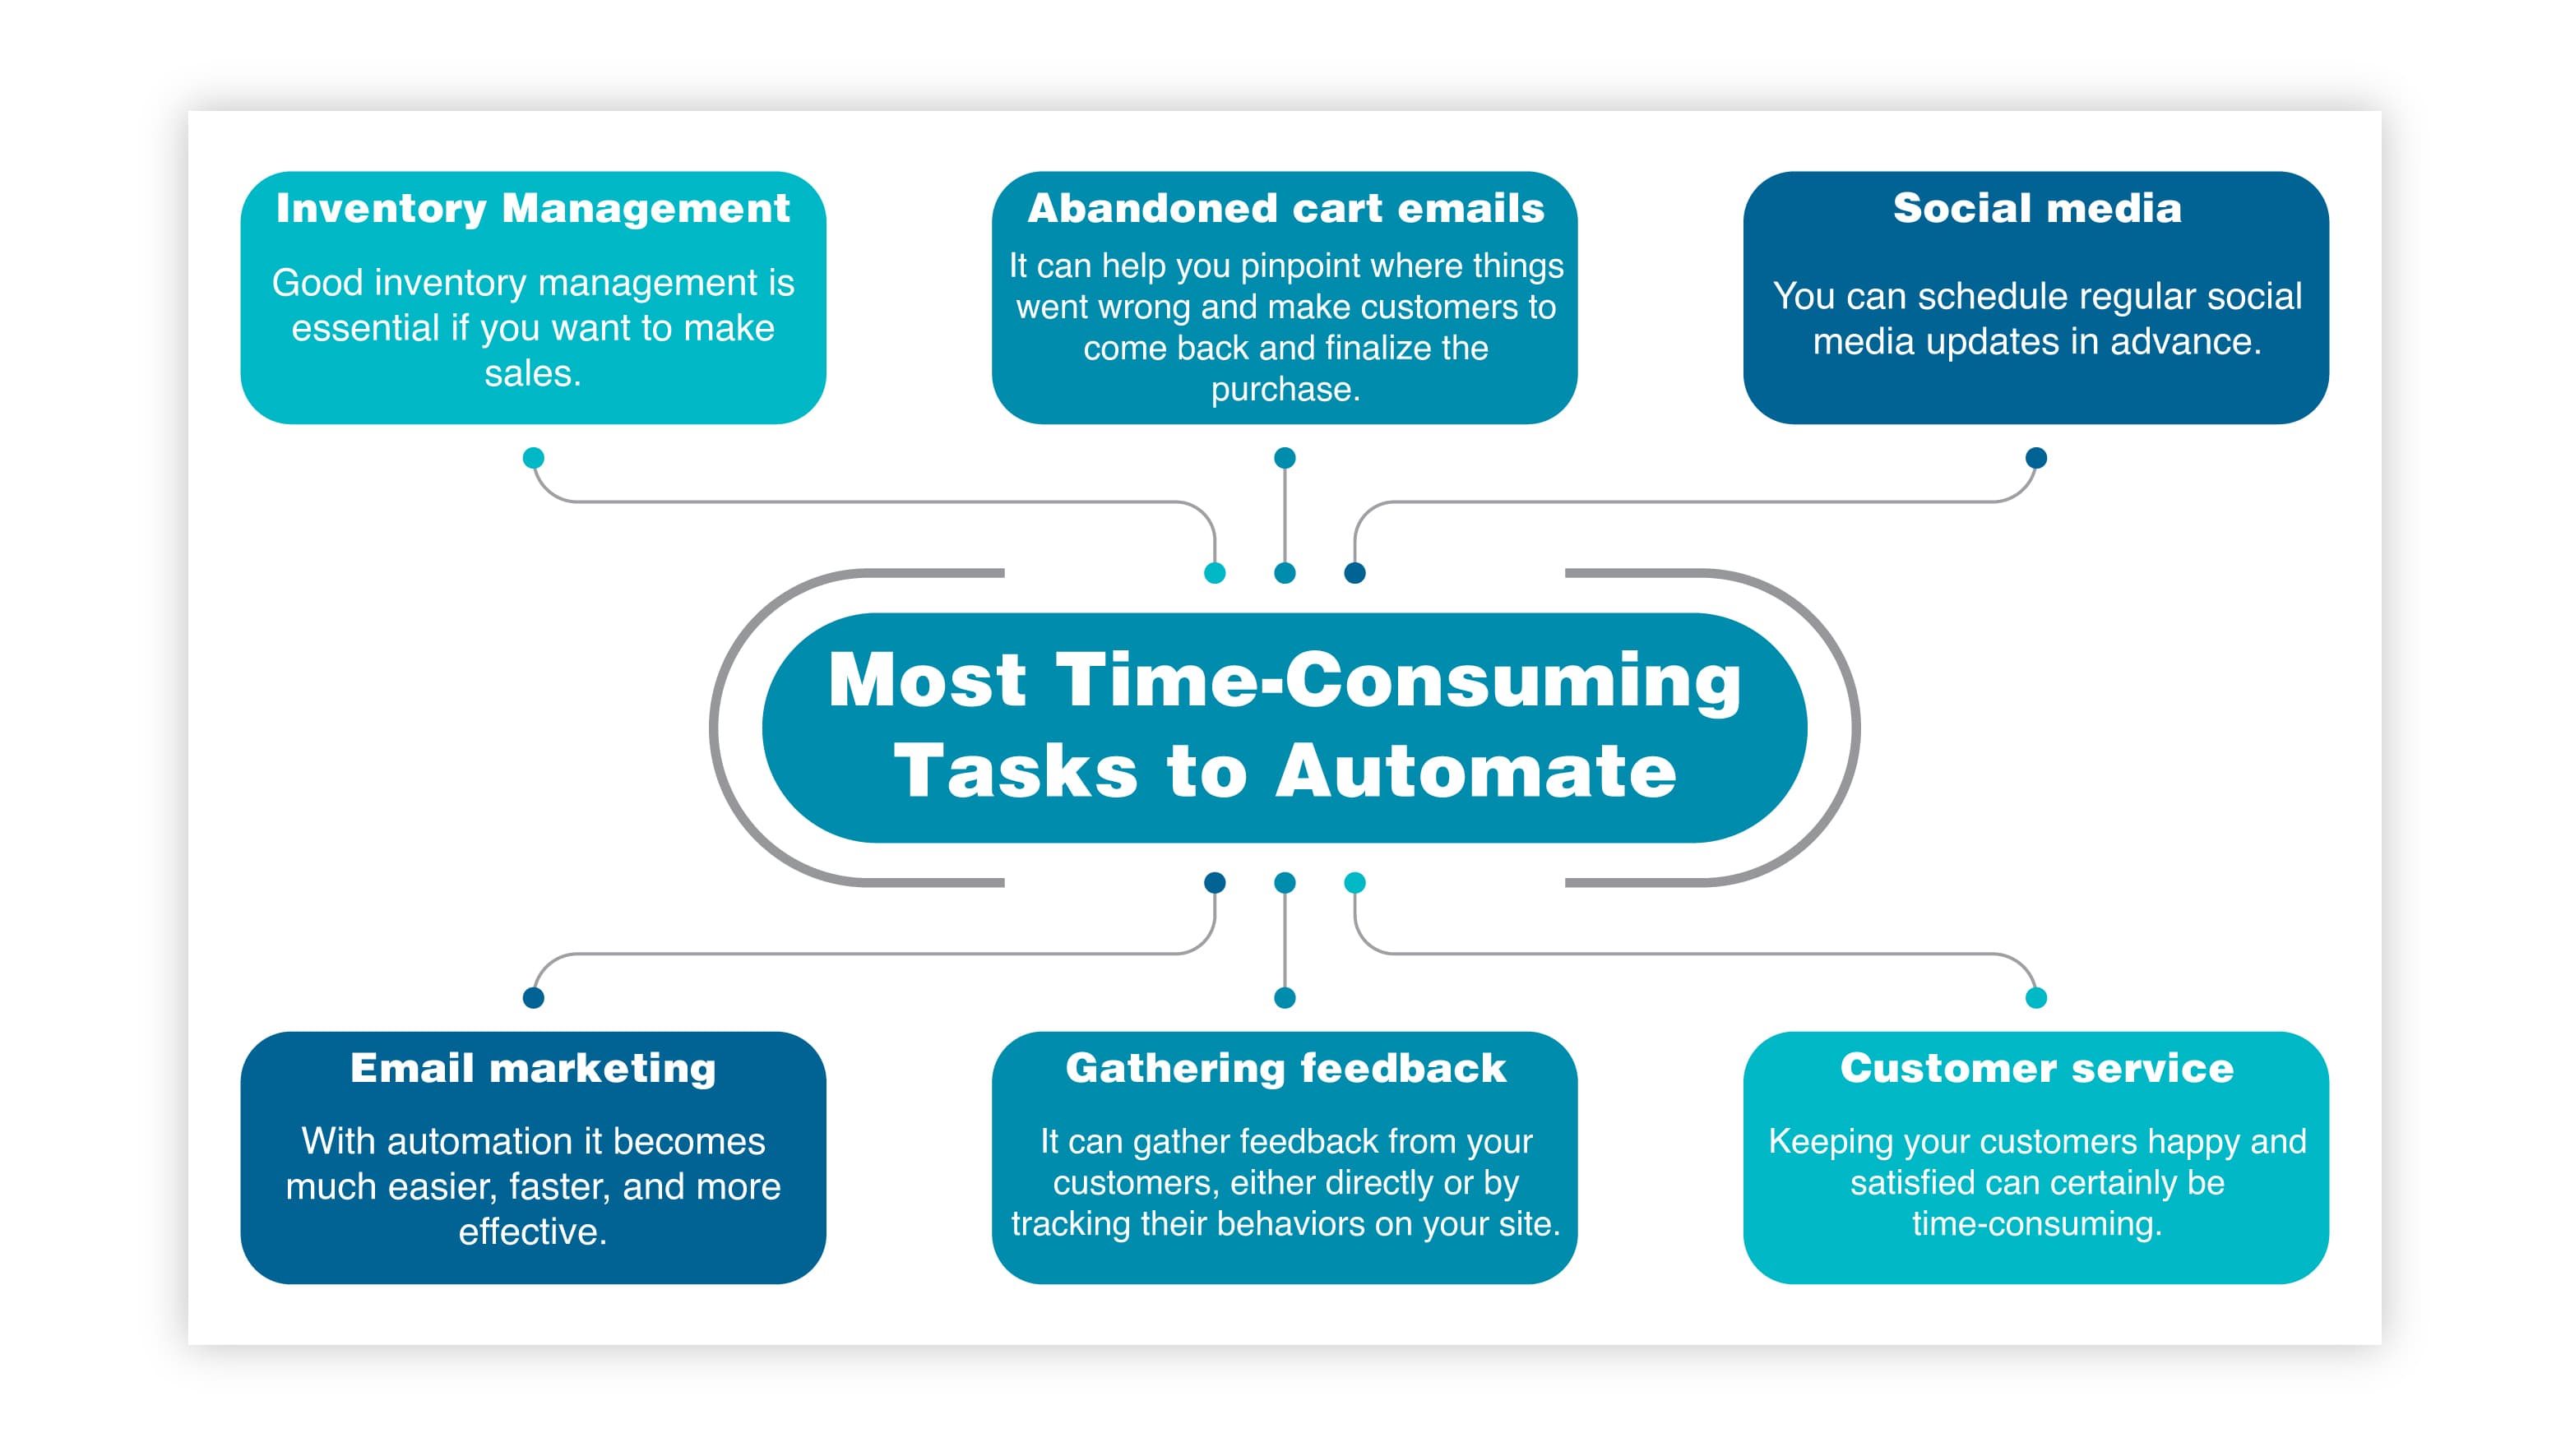 Most Time-Consuming Tasks to Automate